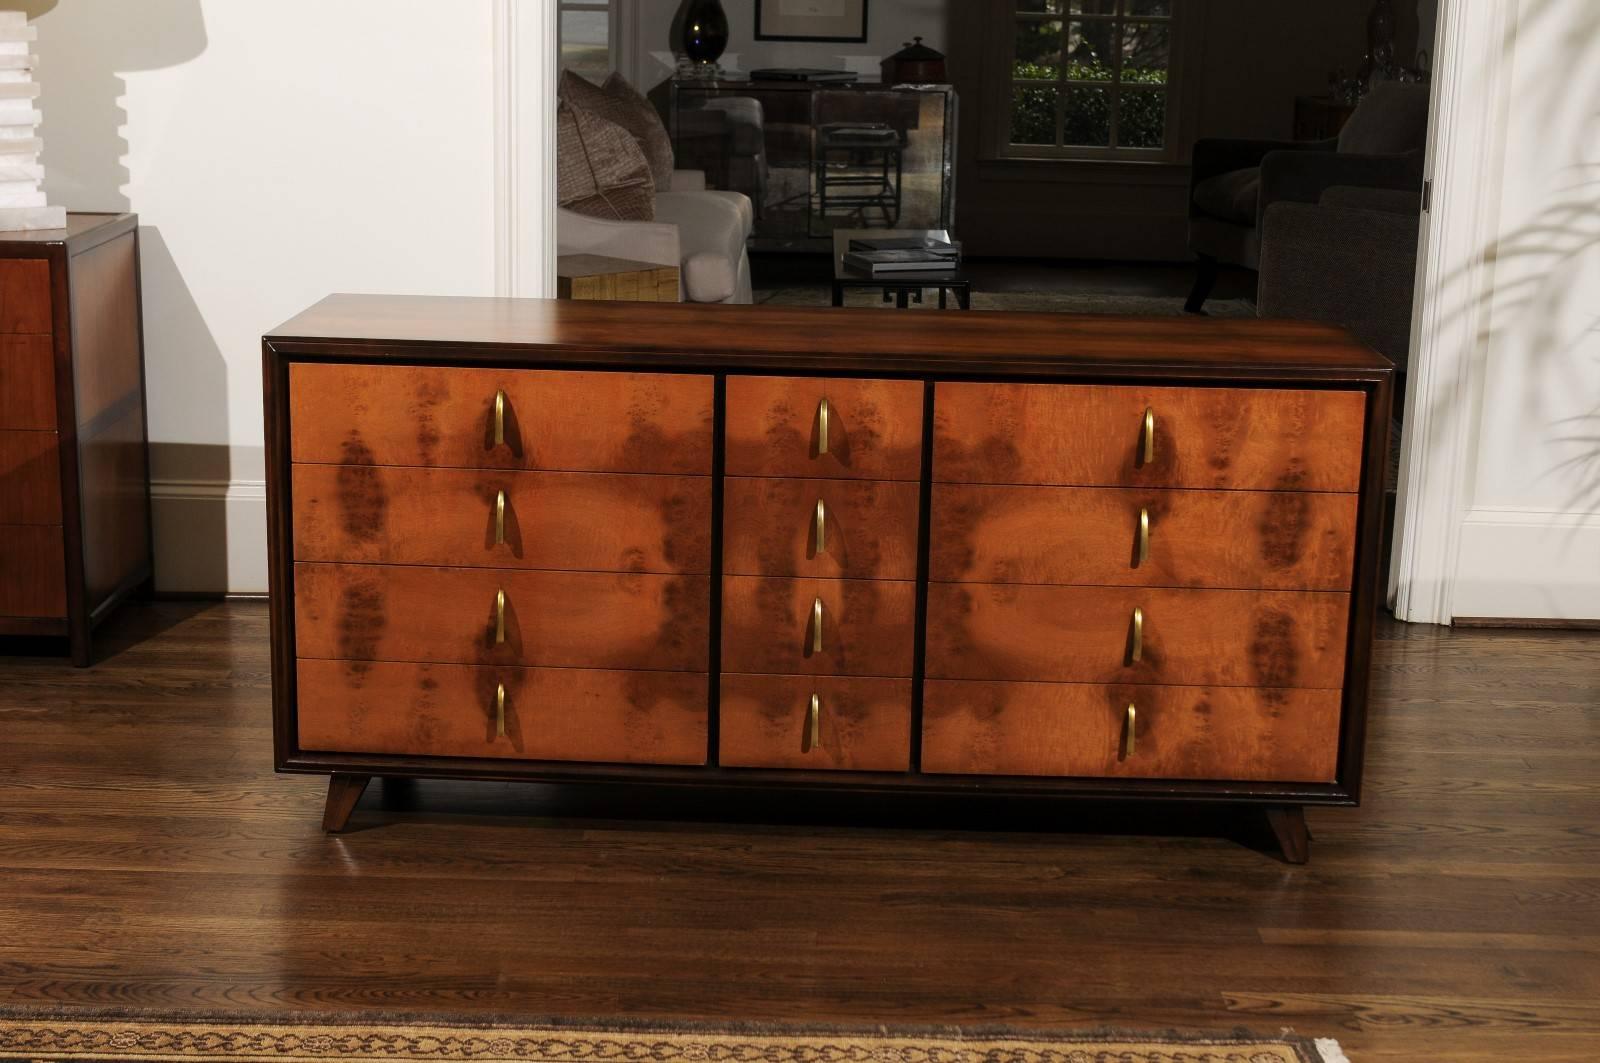 An exquisite 12 drawer chest by John Stuart, circa 1960. Superbly crafted solid black walnut case construction with drawer fronts veneered in bookmatched elm. Simple solid brass Art Deco influenced hardware accent the case. Stunning design and